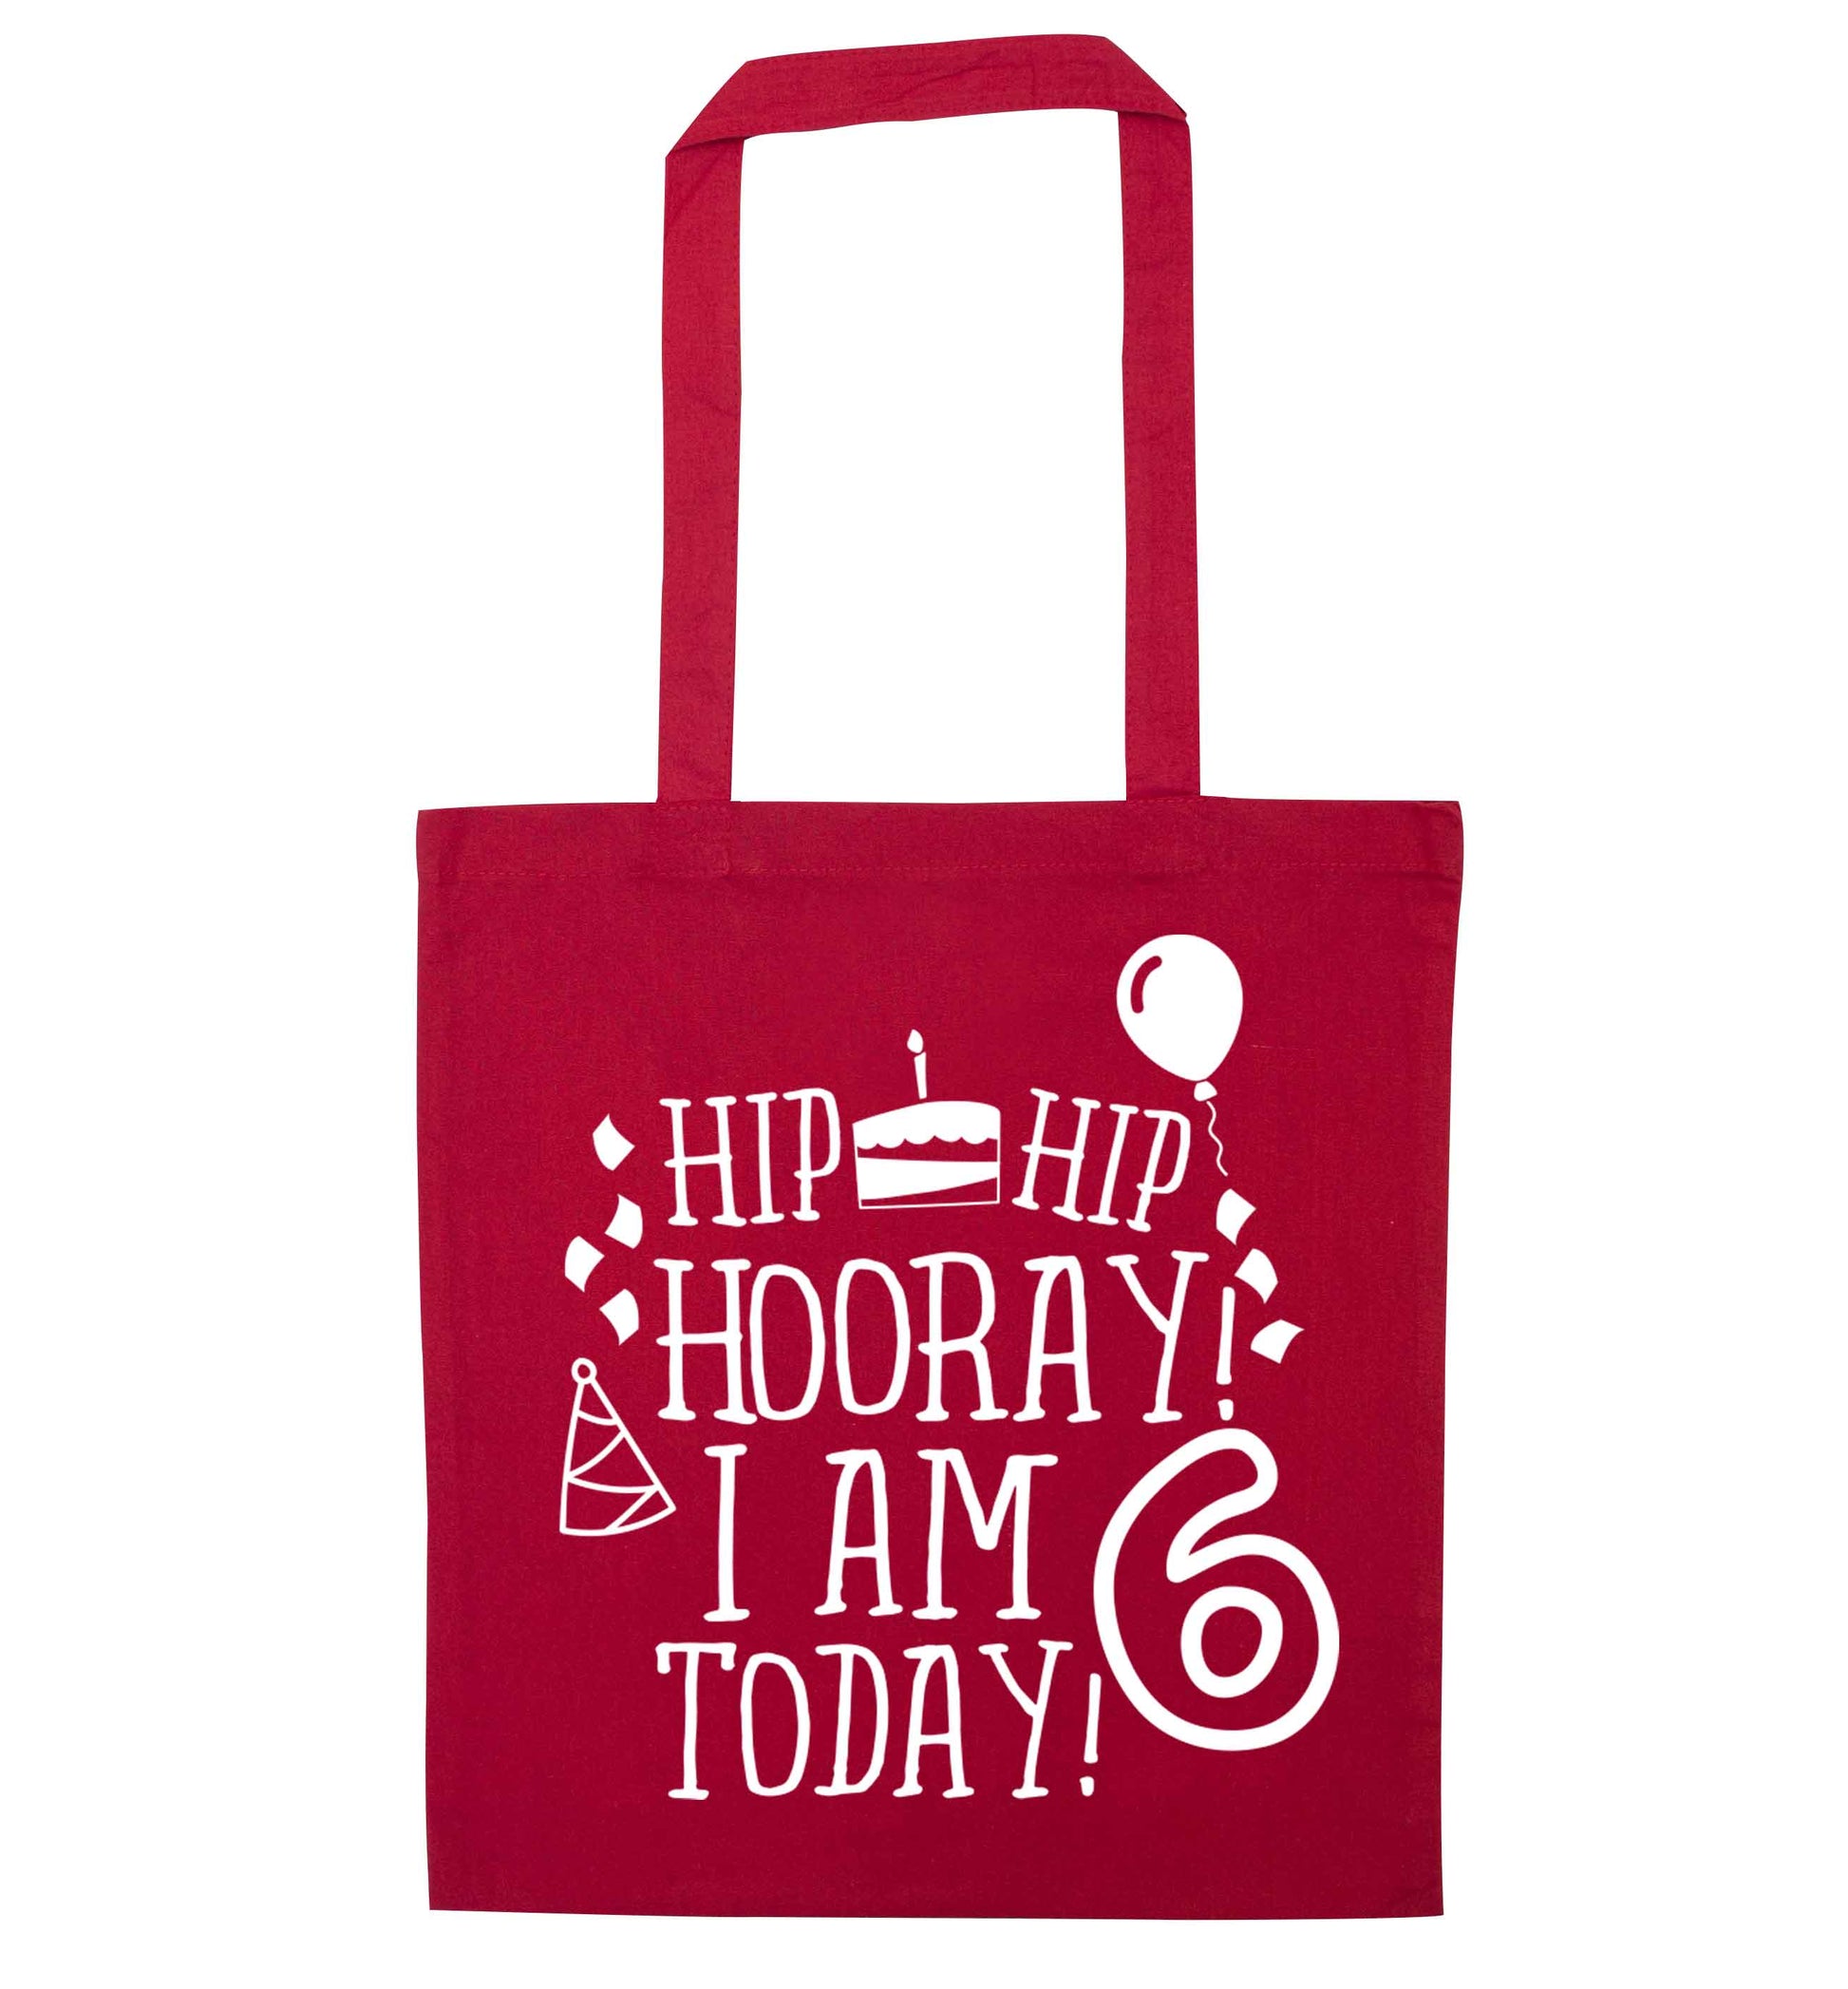 Hip hip hooray I am six today! red tote bag